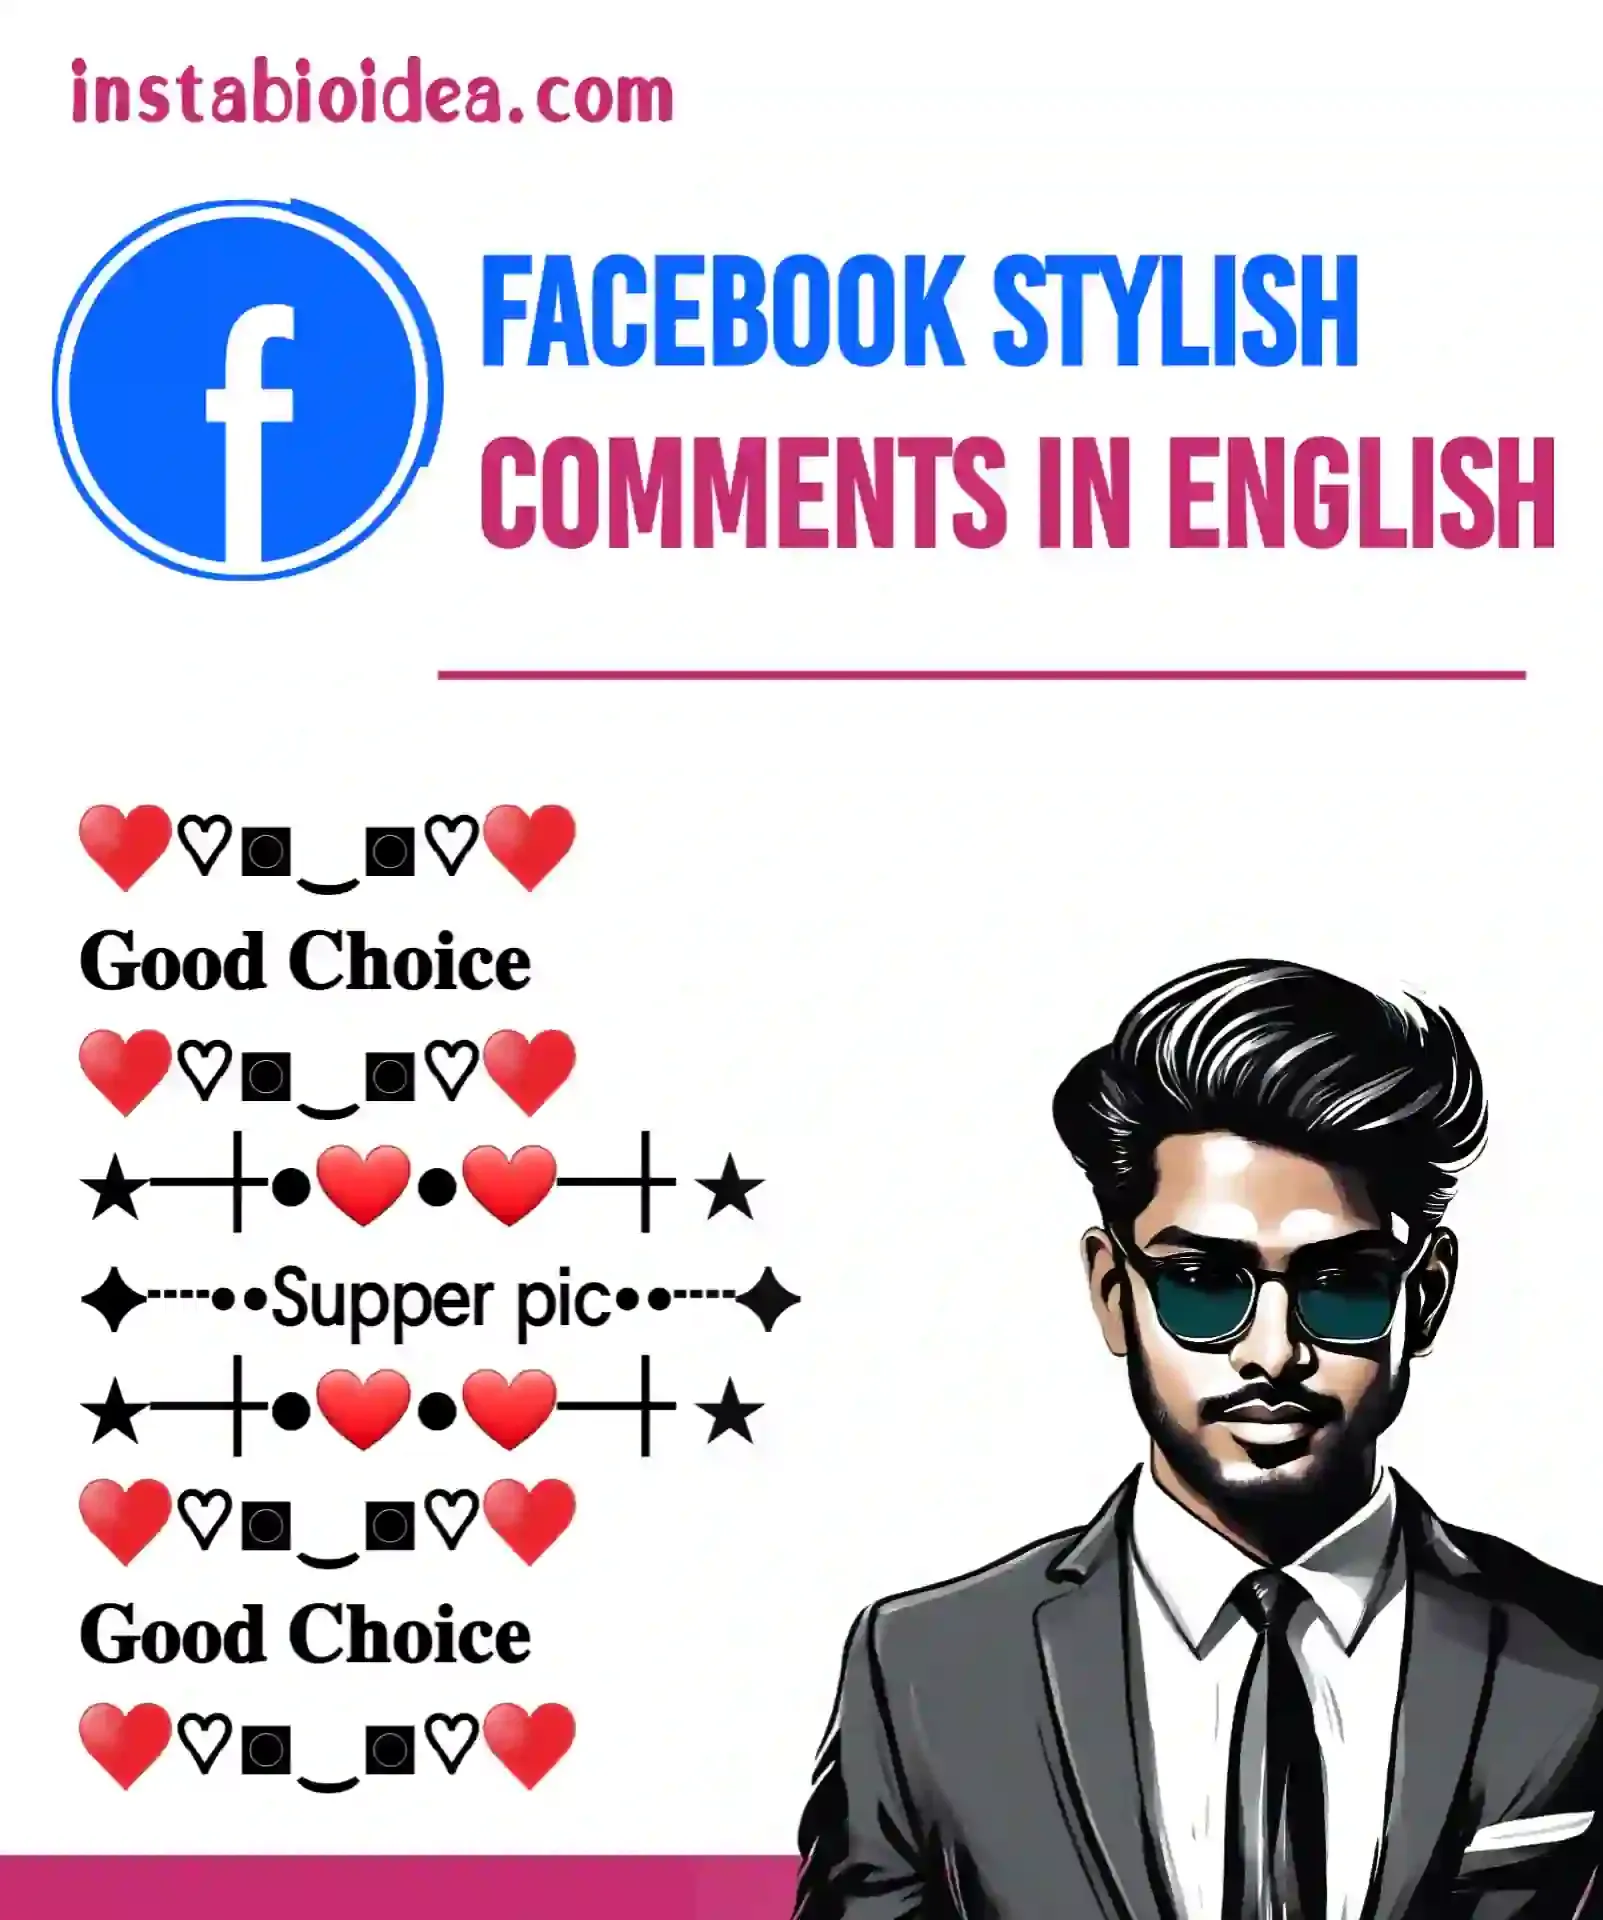 facebook stylish comments in english image